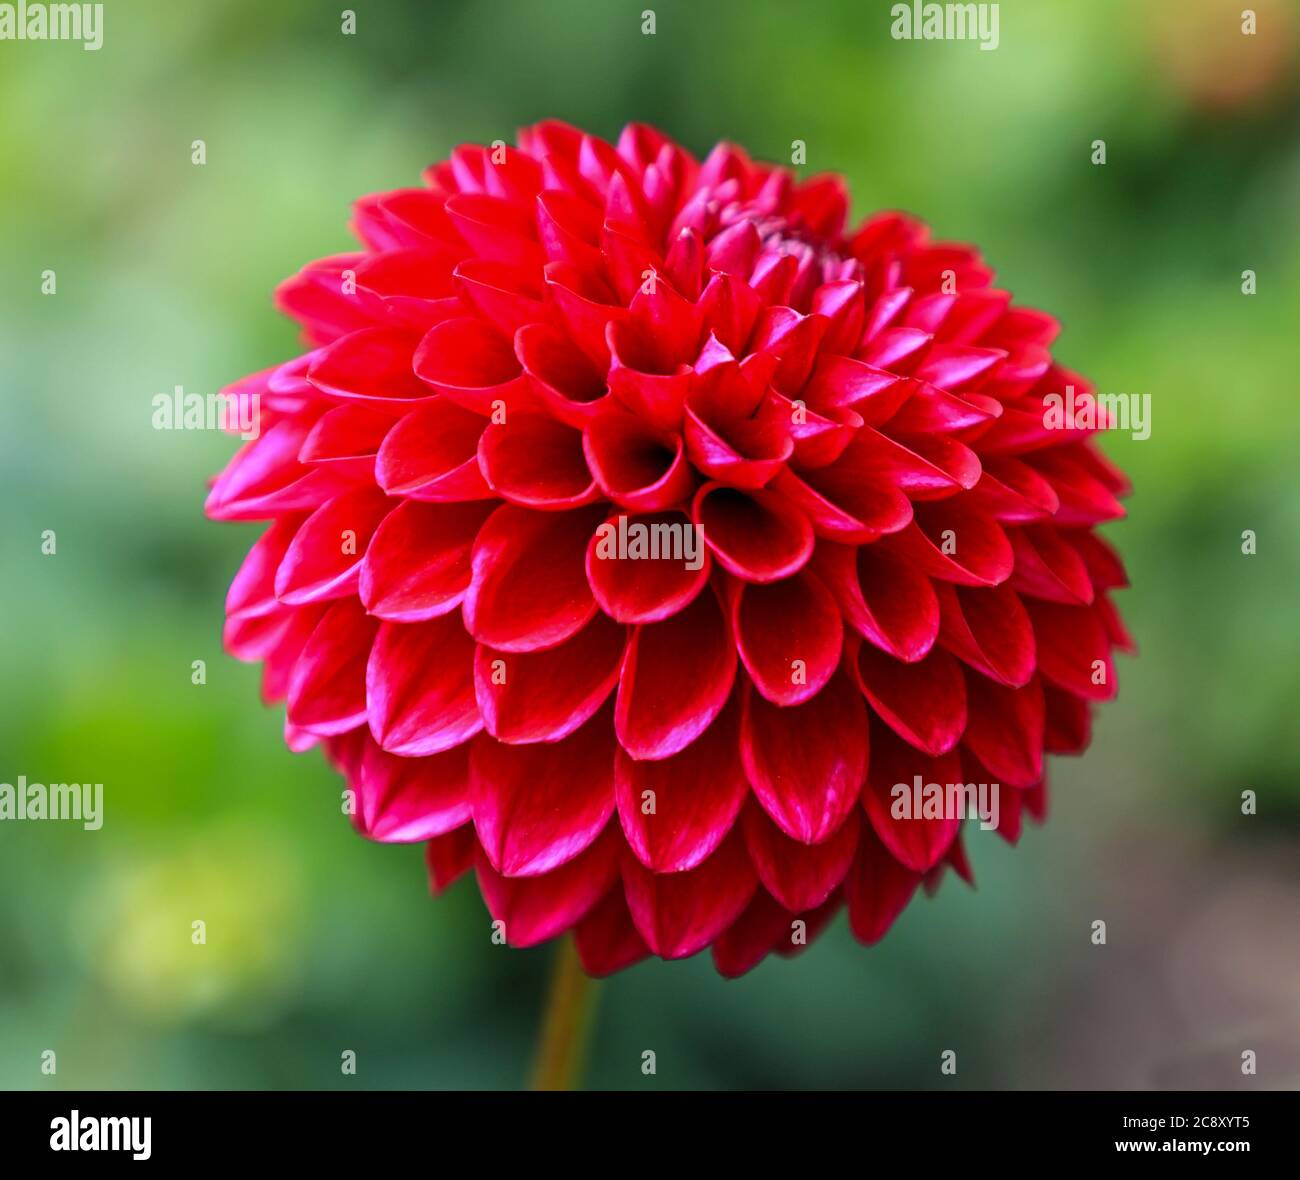 Close up shot of a red flower head of a Dahlia 'Abridge Ben' at the National Dahlia Collection, Penzance, Cornwall, England Stock Photo